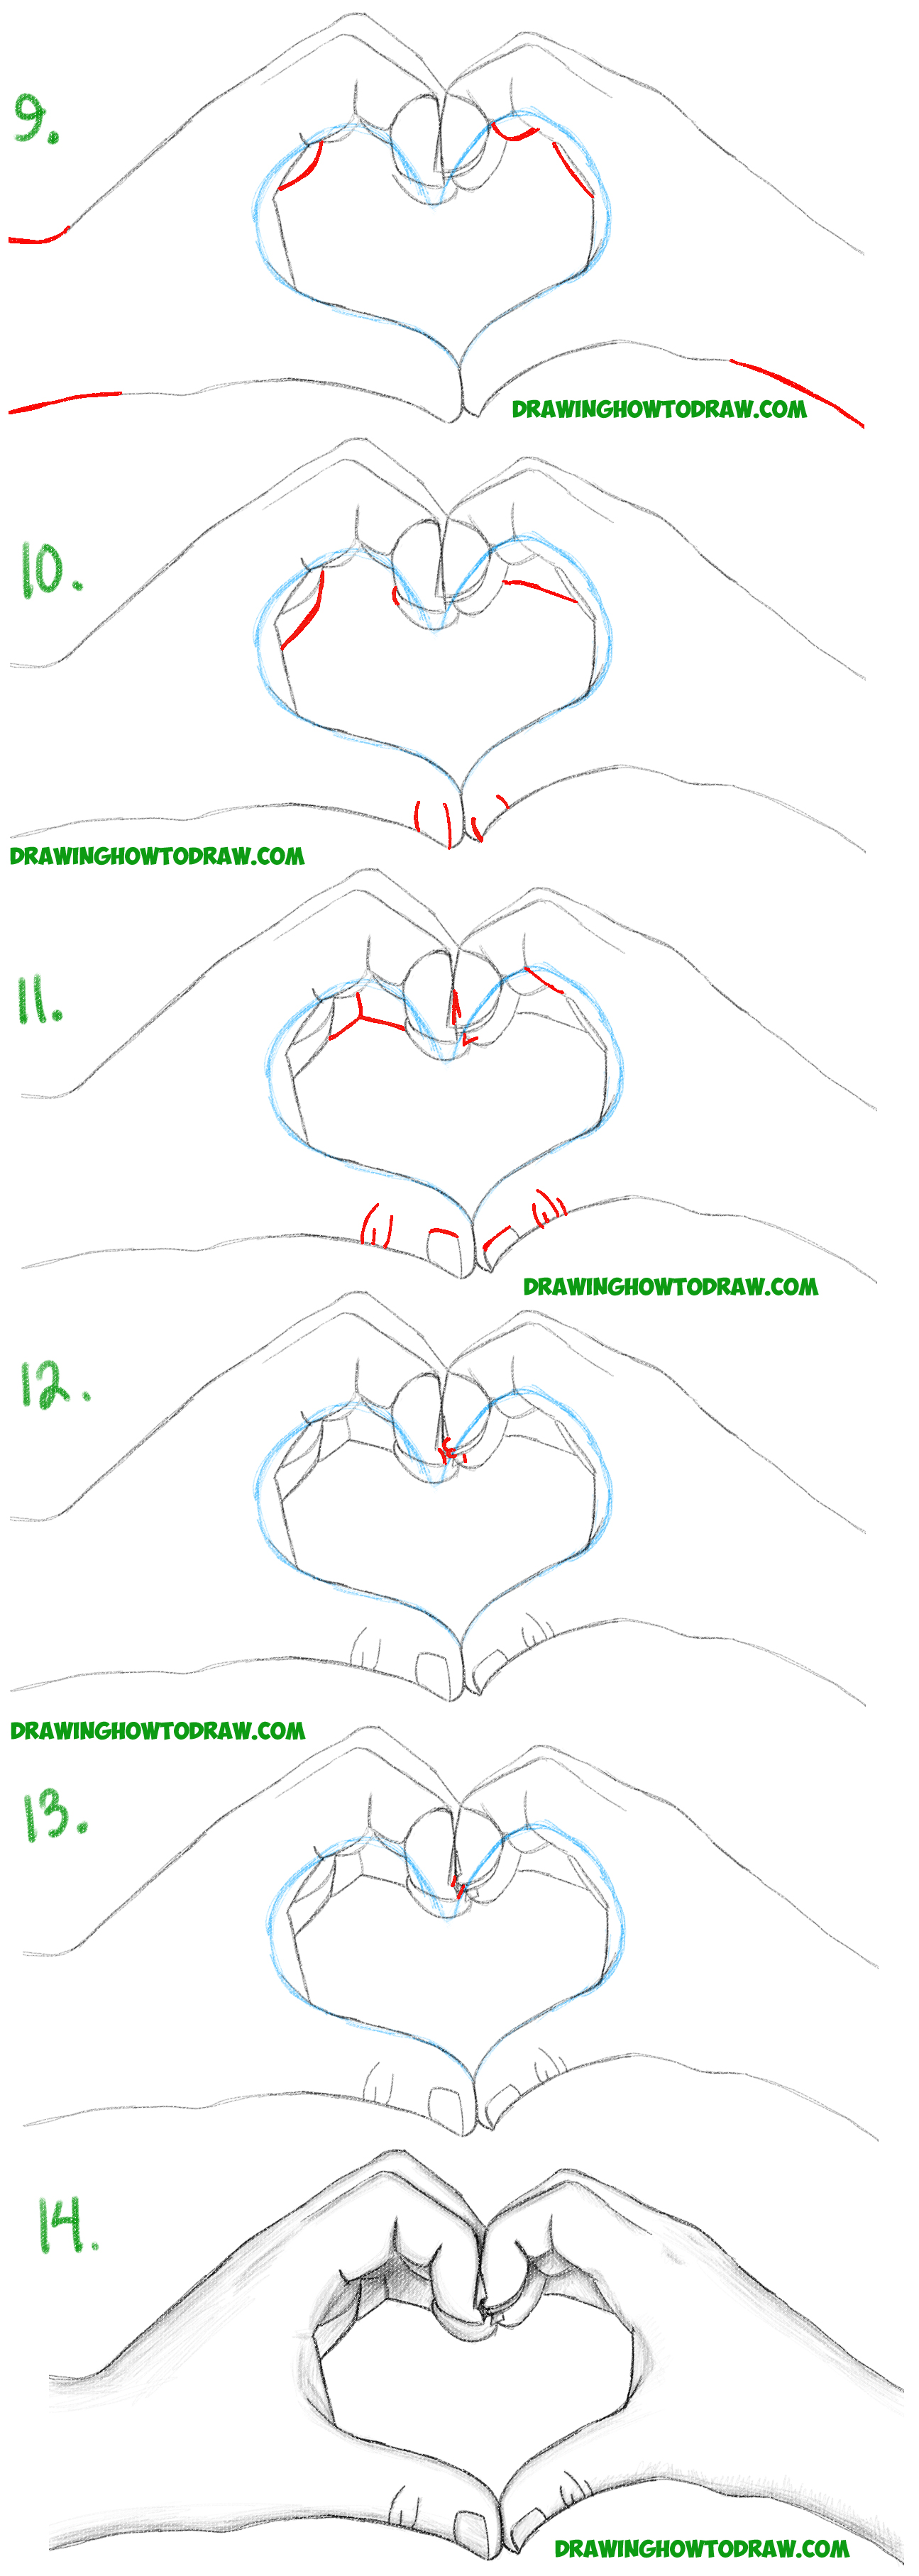 Heart Drawing Step By Step